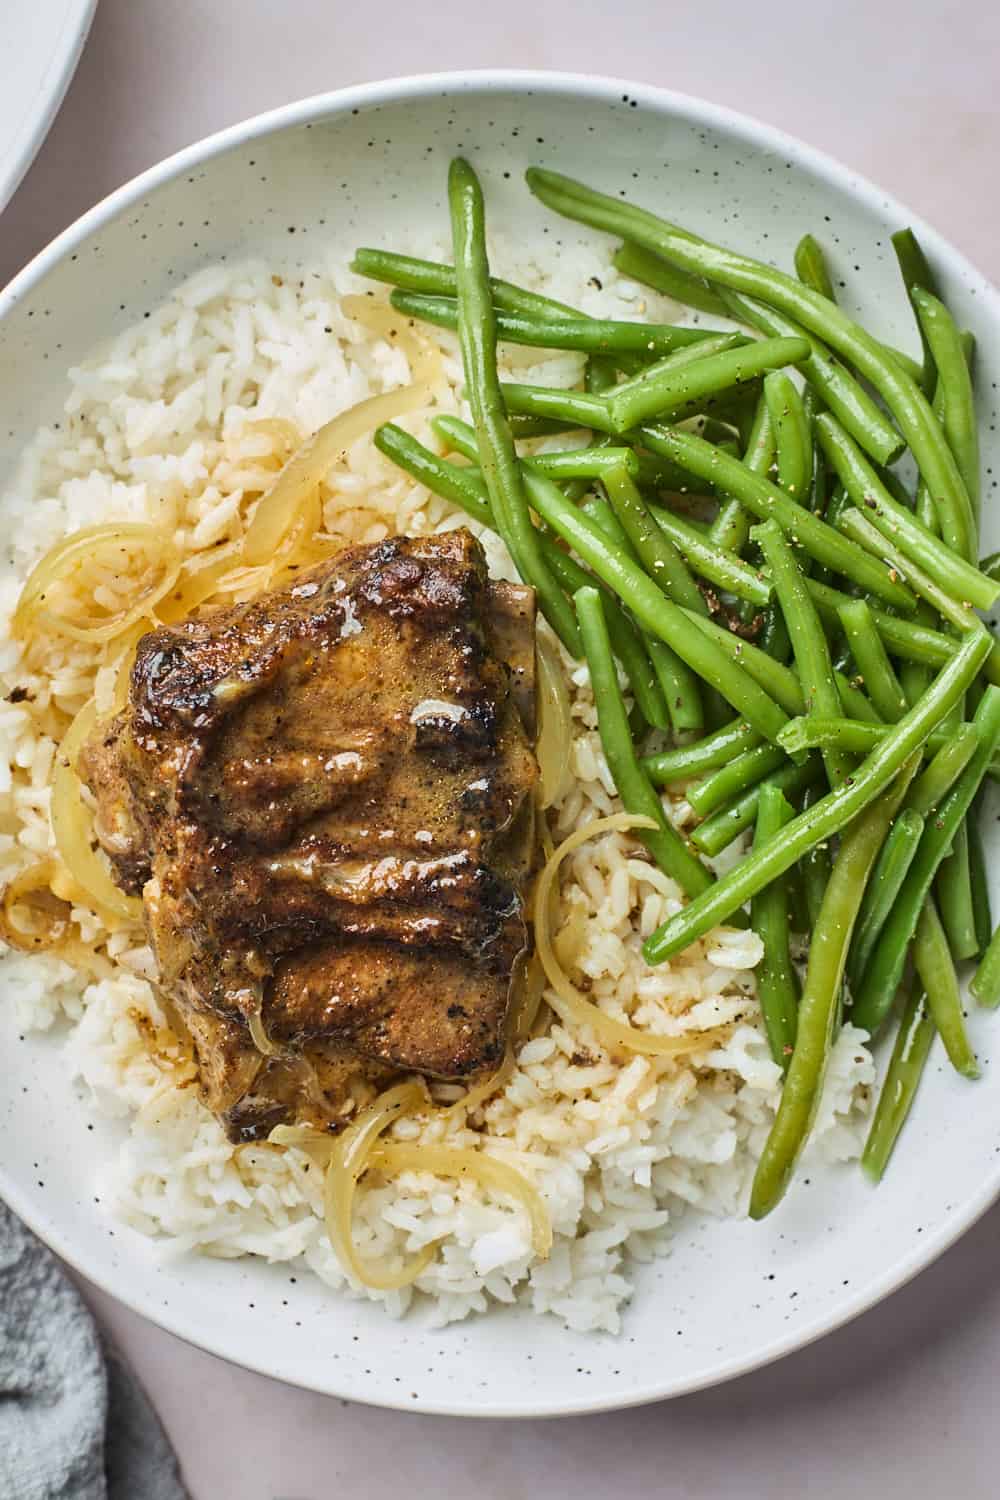 Roasted pork neckbones over rice next to green beans on a plate.